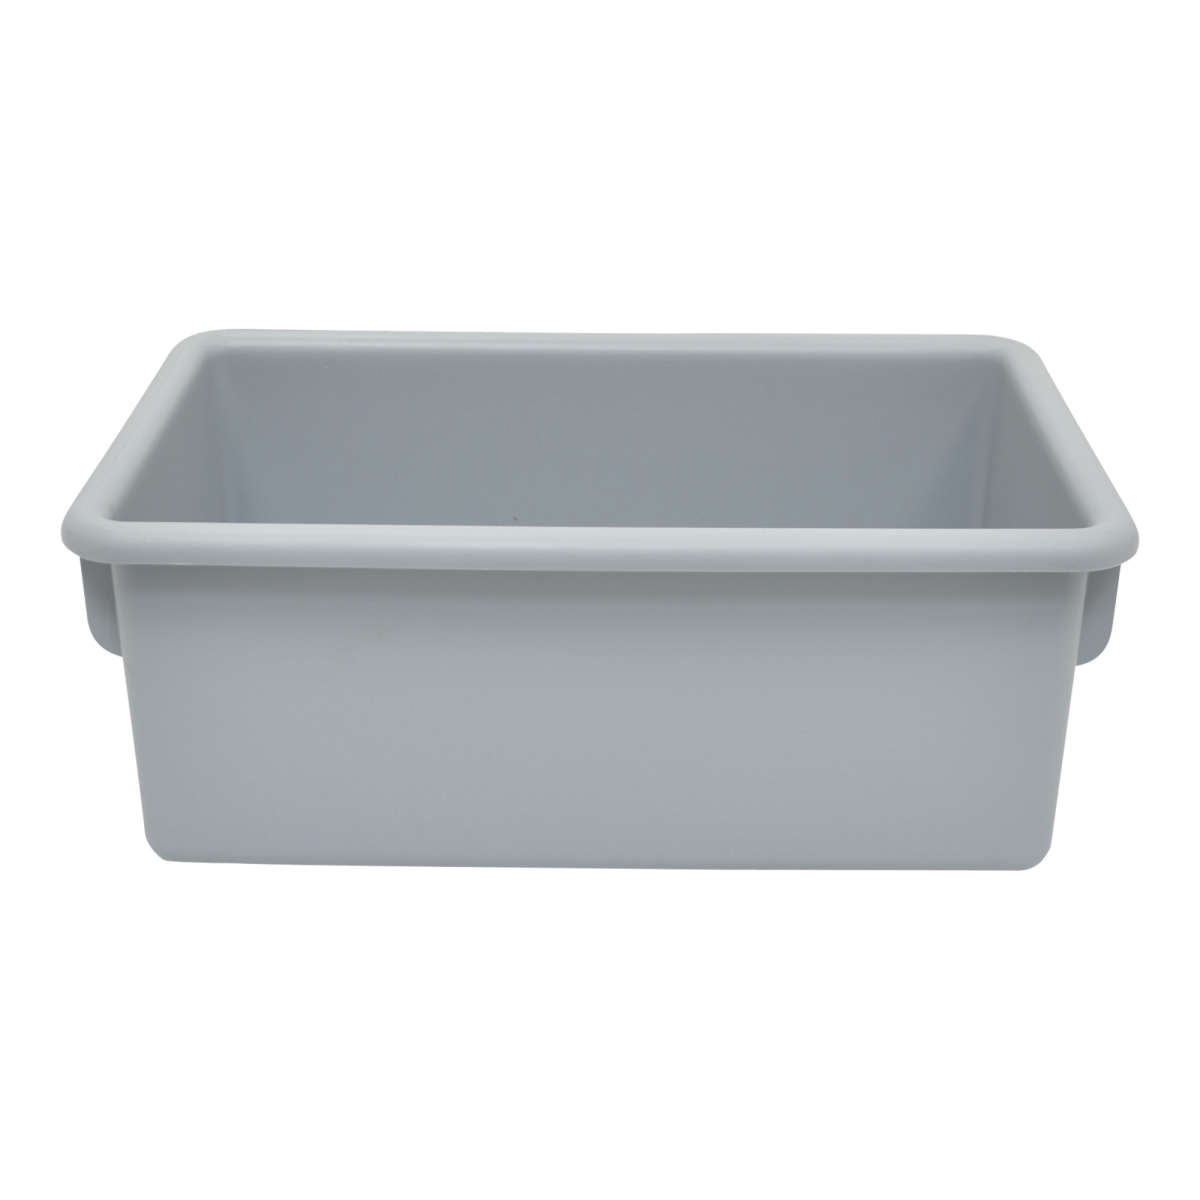 10000gy-5 Storage Tubs, Gray - Pack Of 5